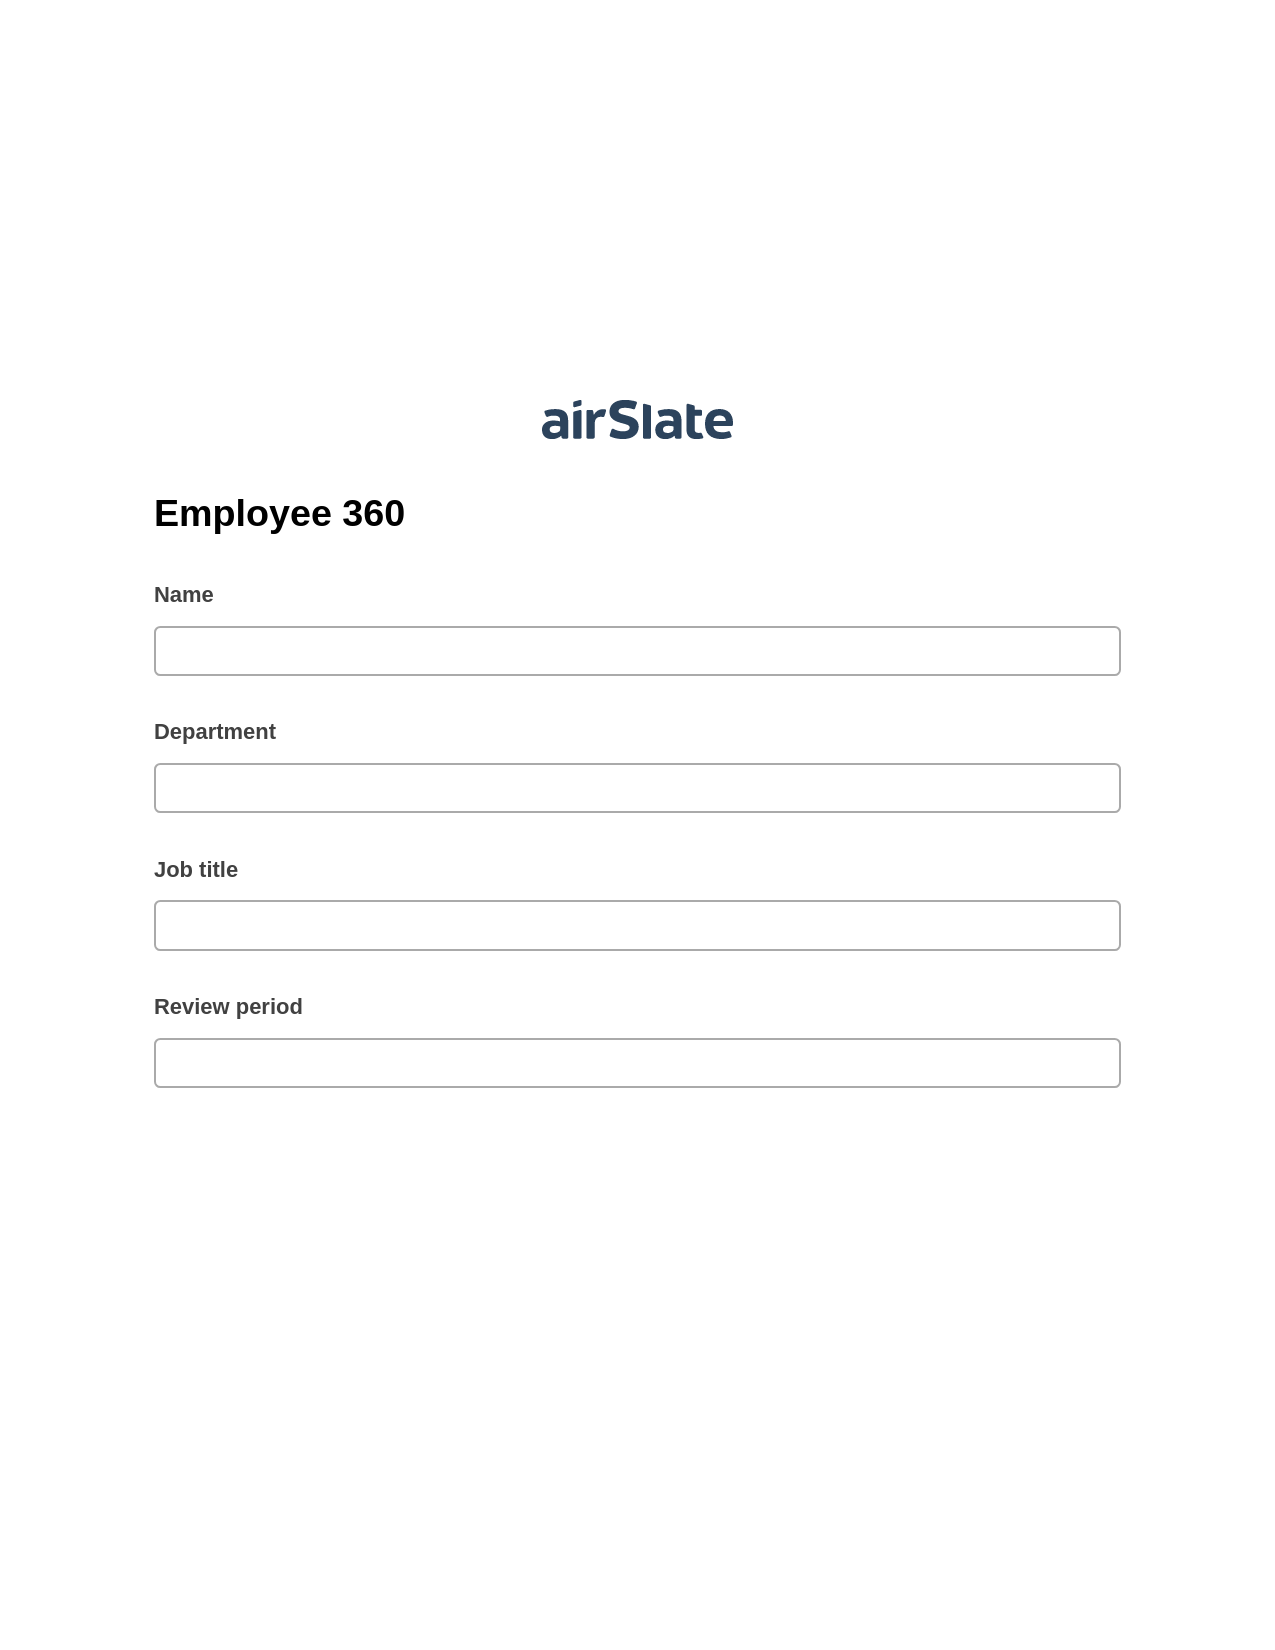 Employee 360 Pre-fill from another Slate Bot, Create MS Dynamics 365 Records Bot, Export to WebMerge Bot